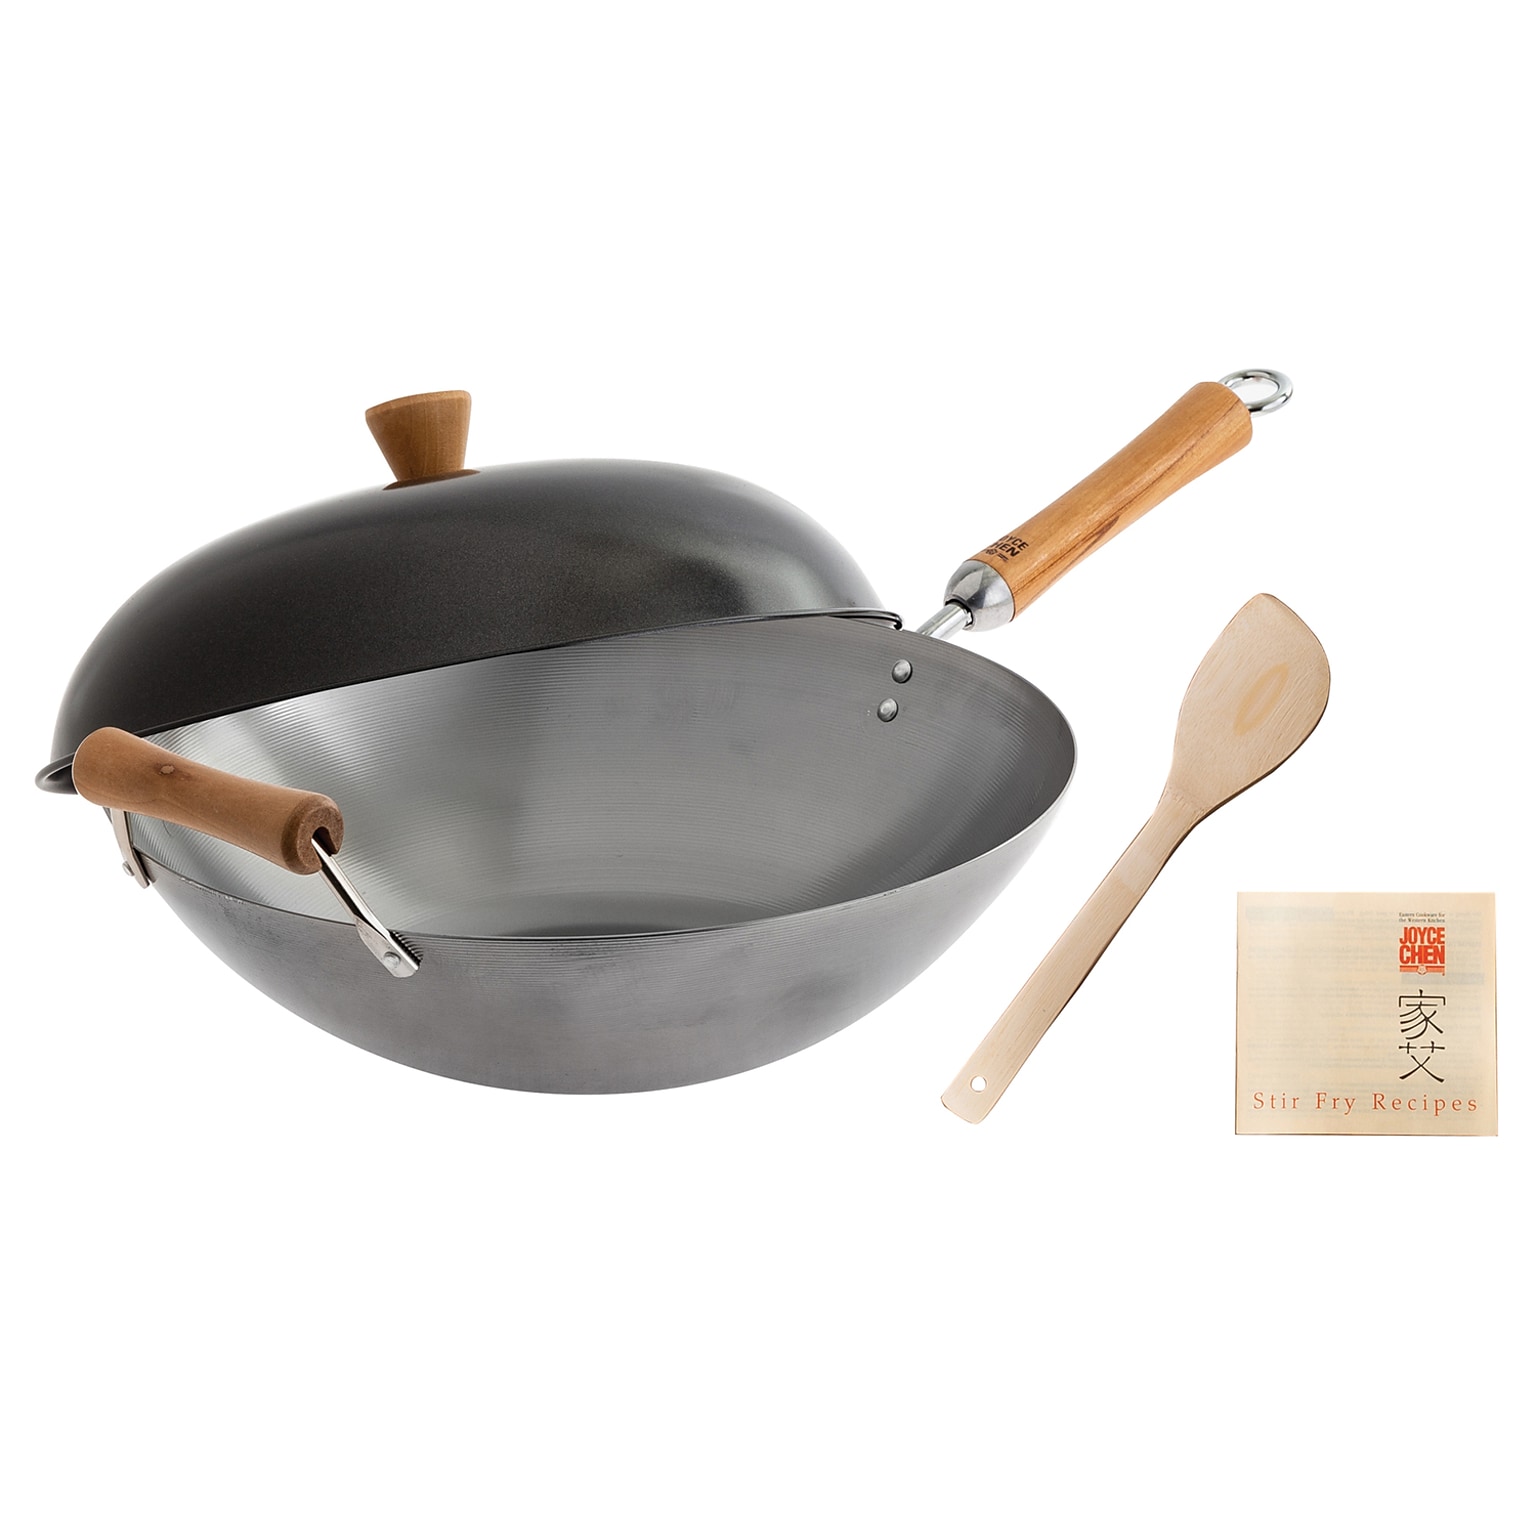 Joyce Chen Classic Series 14-Inch Uncoated Carbon Steel Wok Set with Lid & Birch Handles, 4-Pieces, Silver (J21-9972)